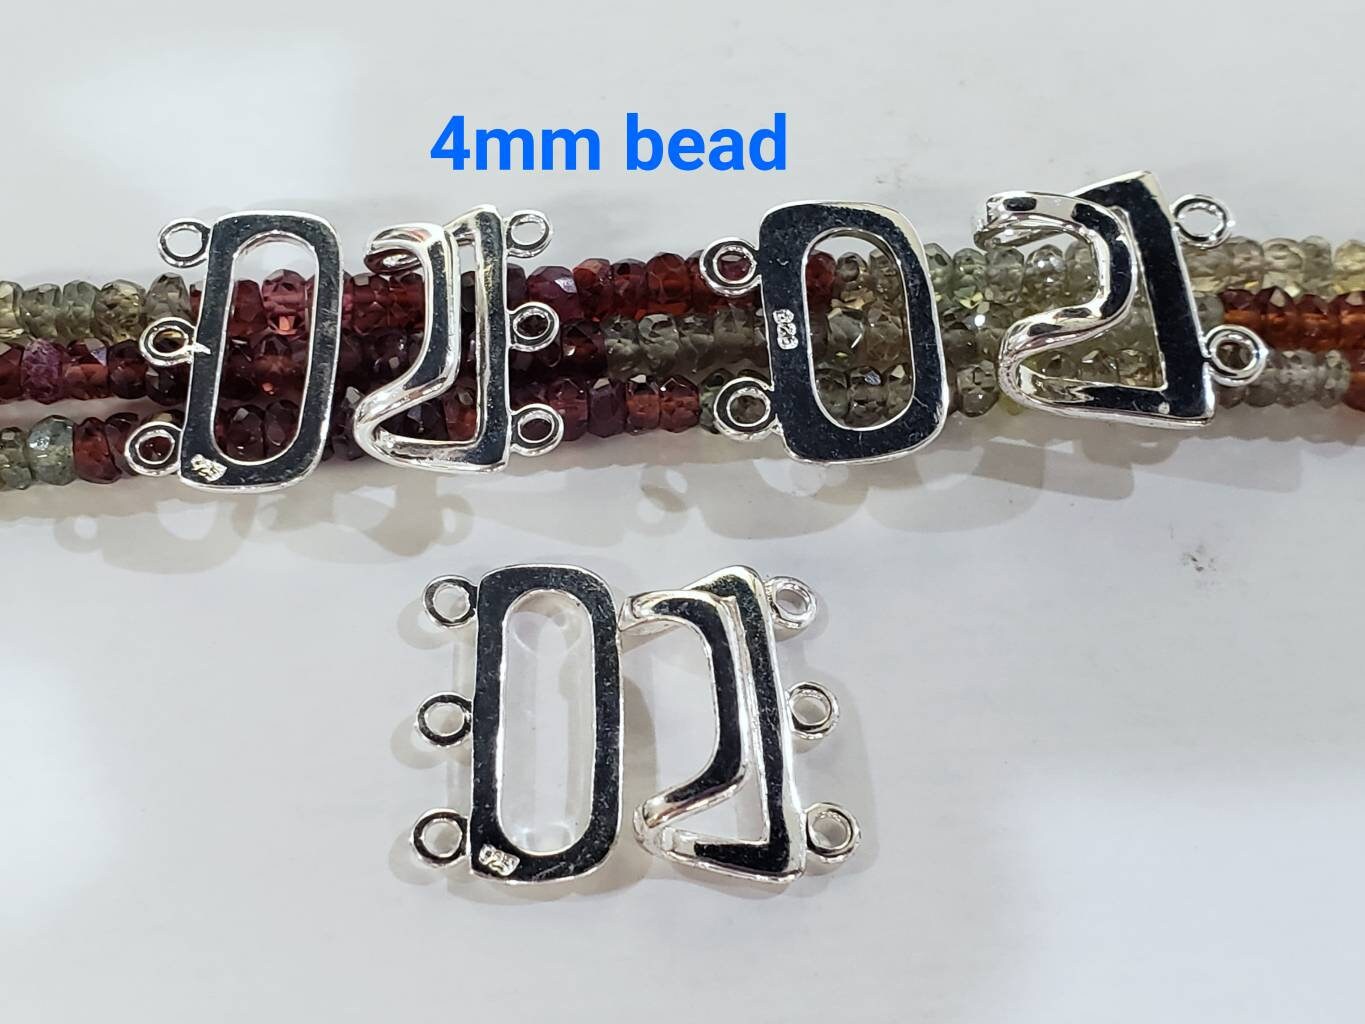 925 Sterling Silver 2 loop and 3 loop fancy Clasp for necklaces. High quality 925 stamped.